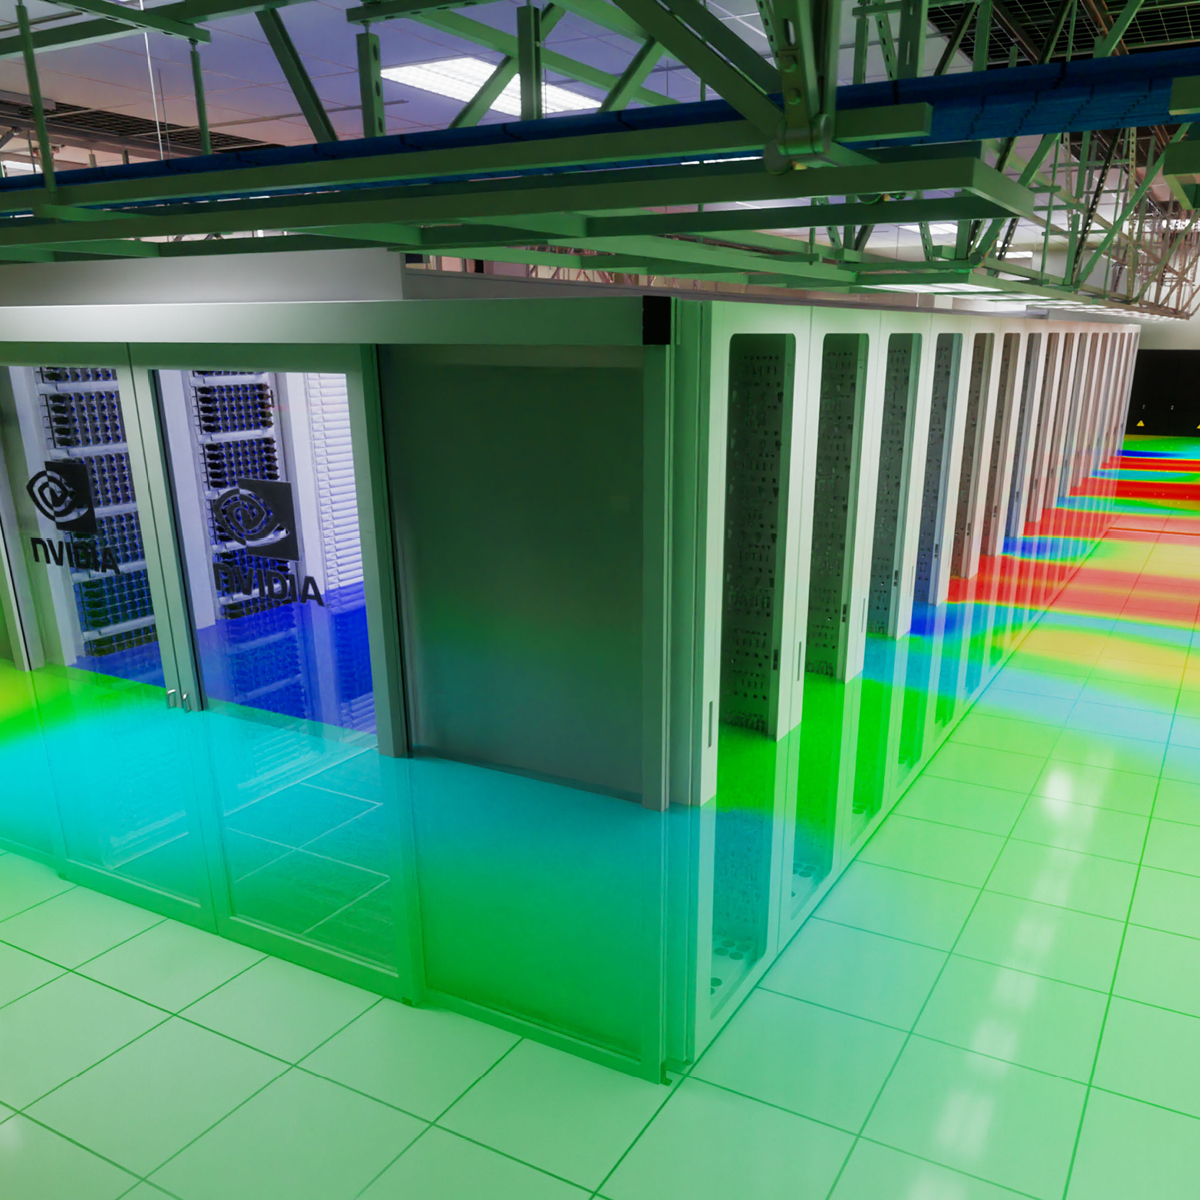 Image shows a simulation of the temperature and air flow in a data center equipped with NVIDIA BlueField-3 DPUs.